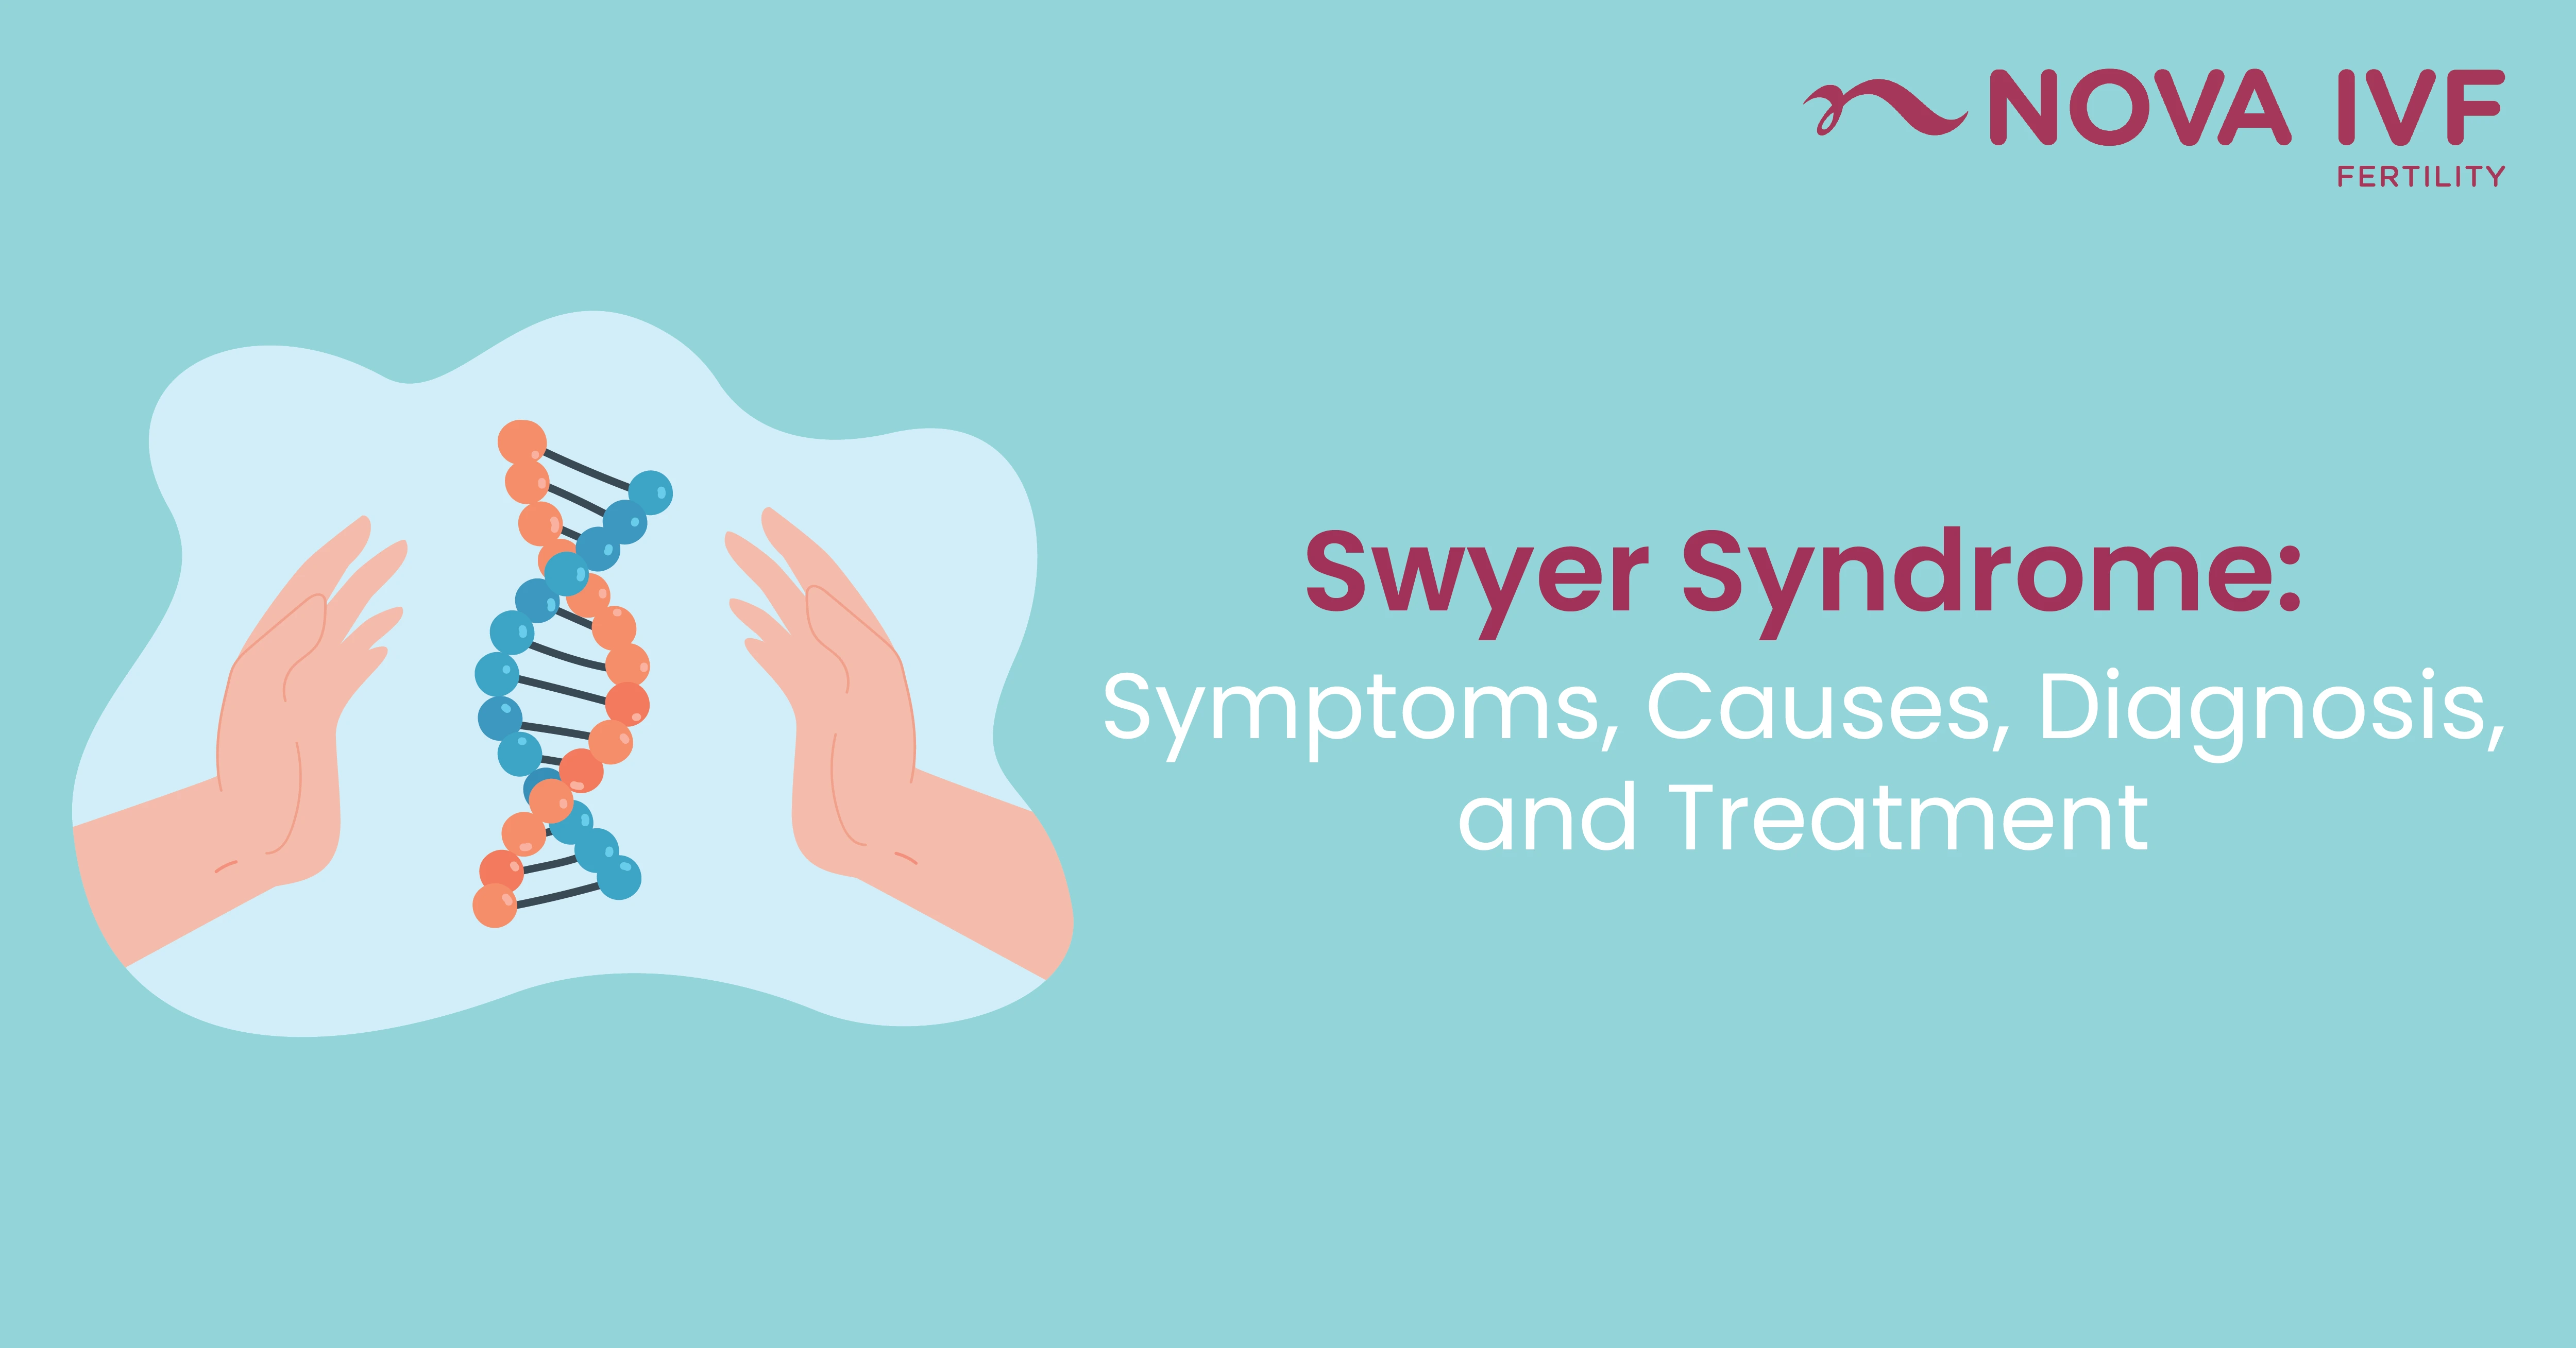 Swyer Syndrome: Symptoms, Causes, Diagnosis, and Treatment